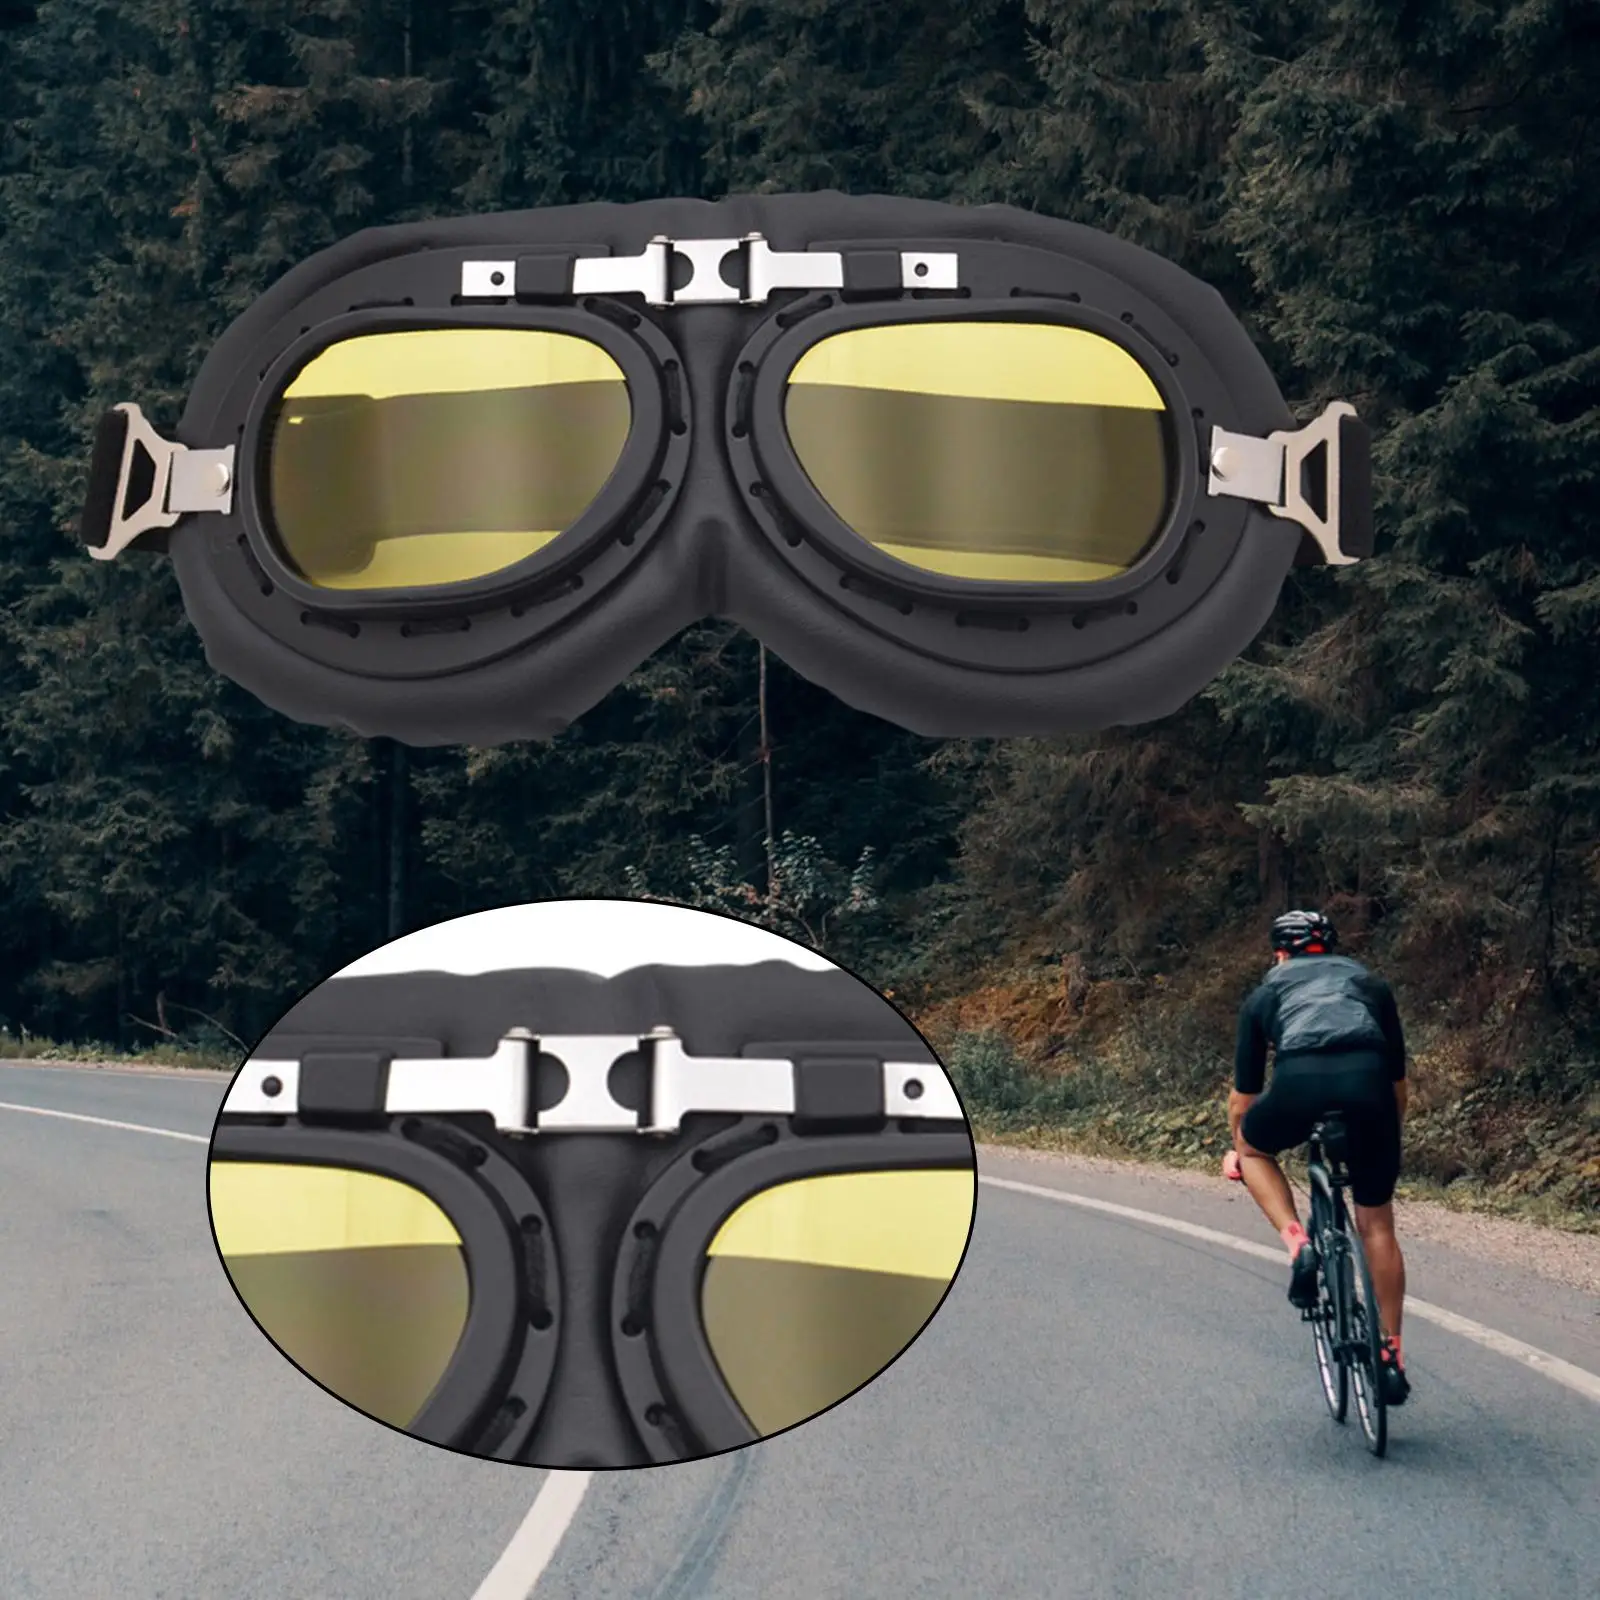 2x Motorcycle Goggles-Fit for  Touring Racer